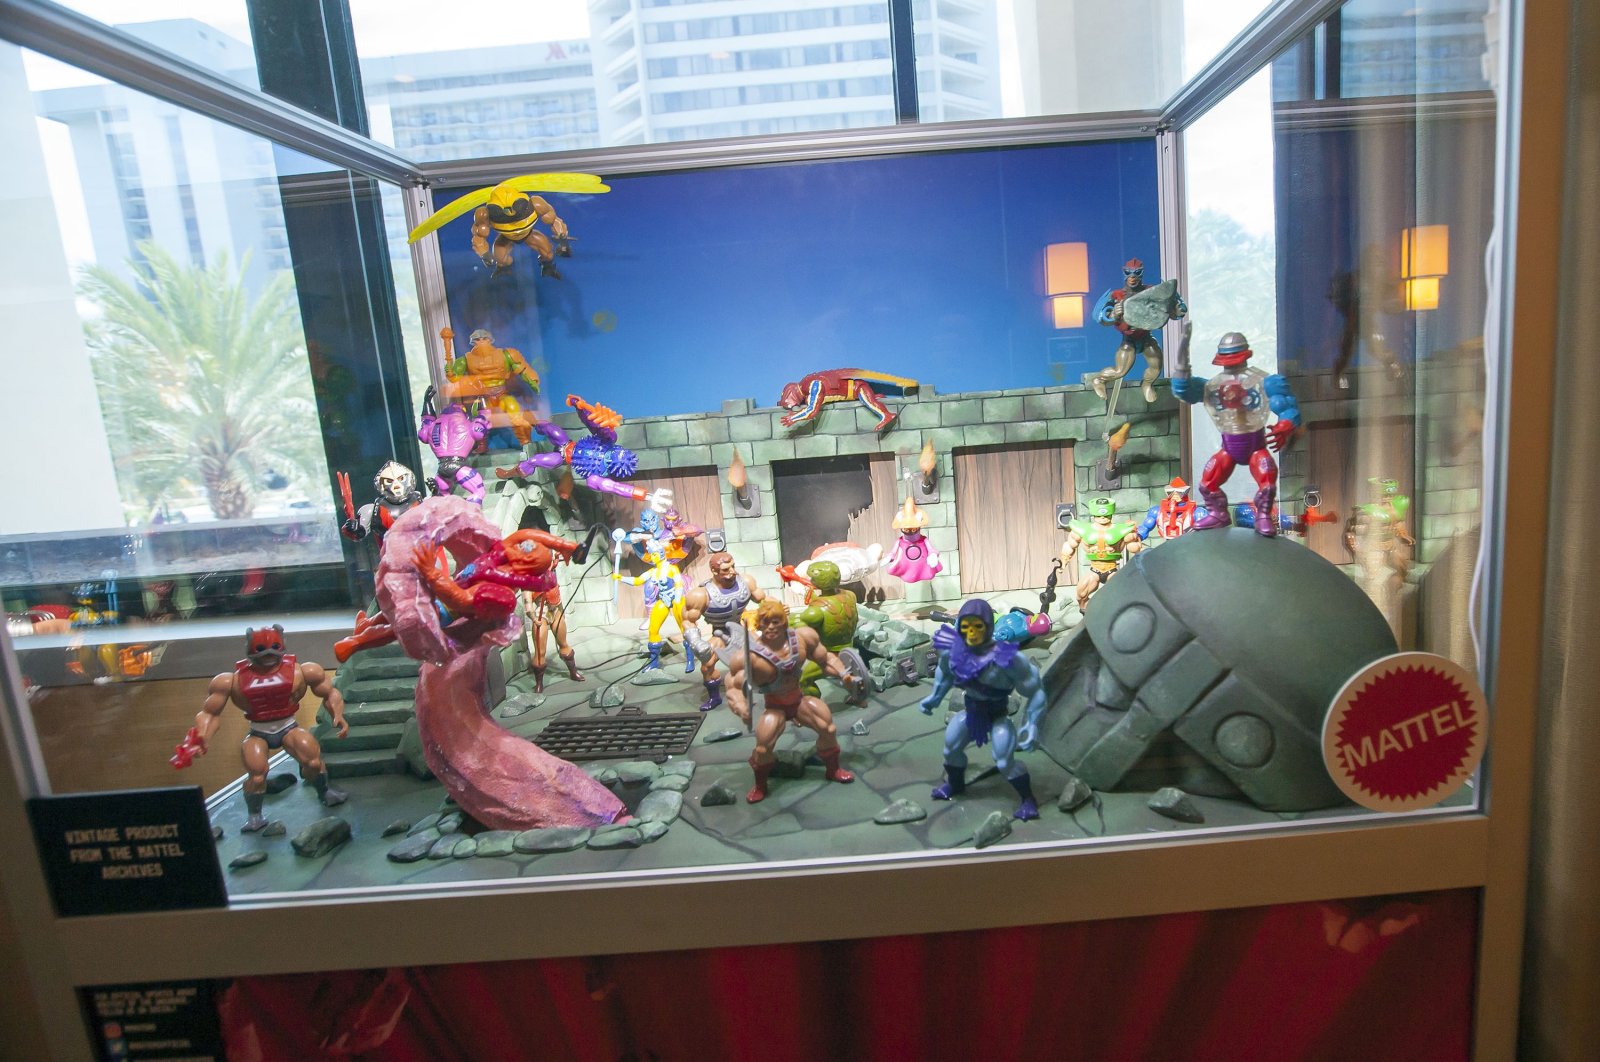 Vintage Mattel Masters of the Universe toys on display during Power-Con 2019 at Hilton Anaheim in Anaheim, California, U.S., Aug. 18, 2019. (Getty Images)